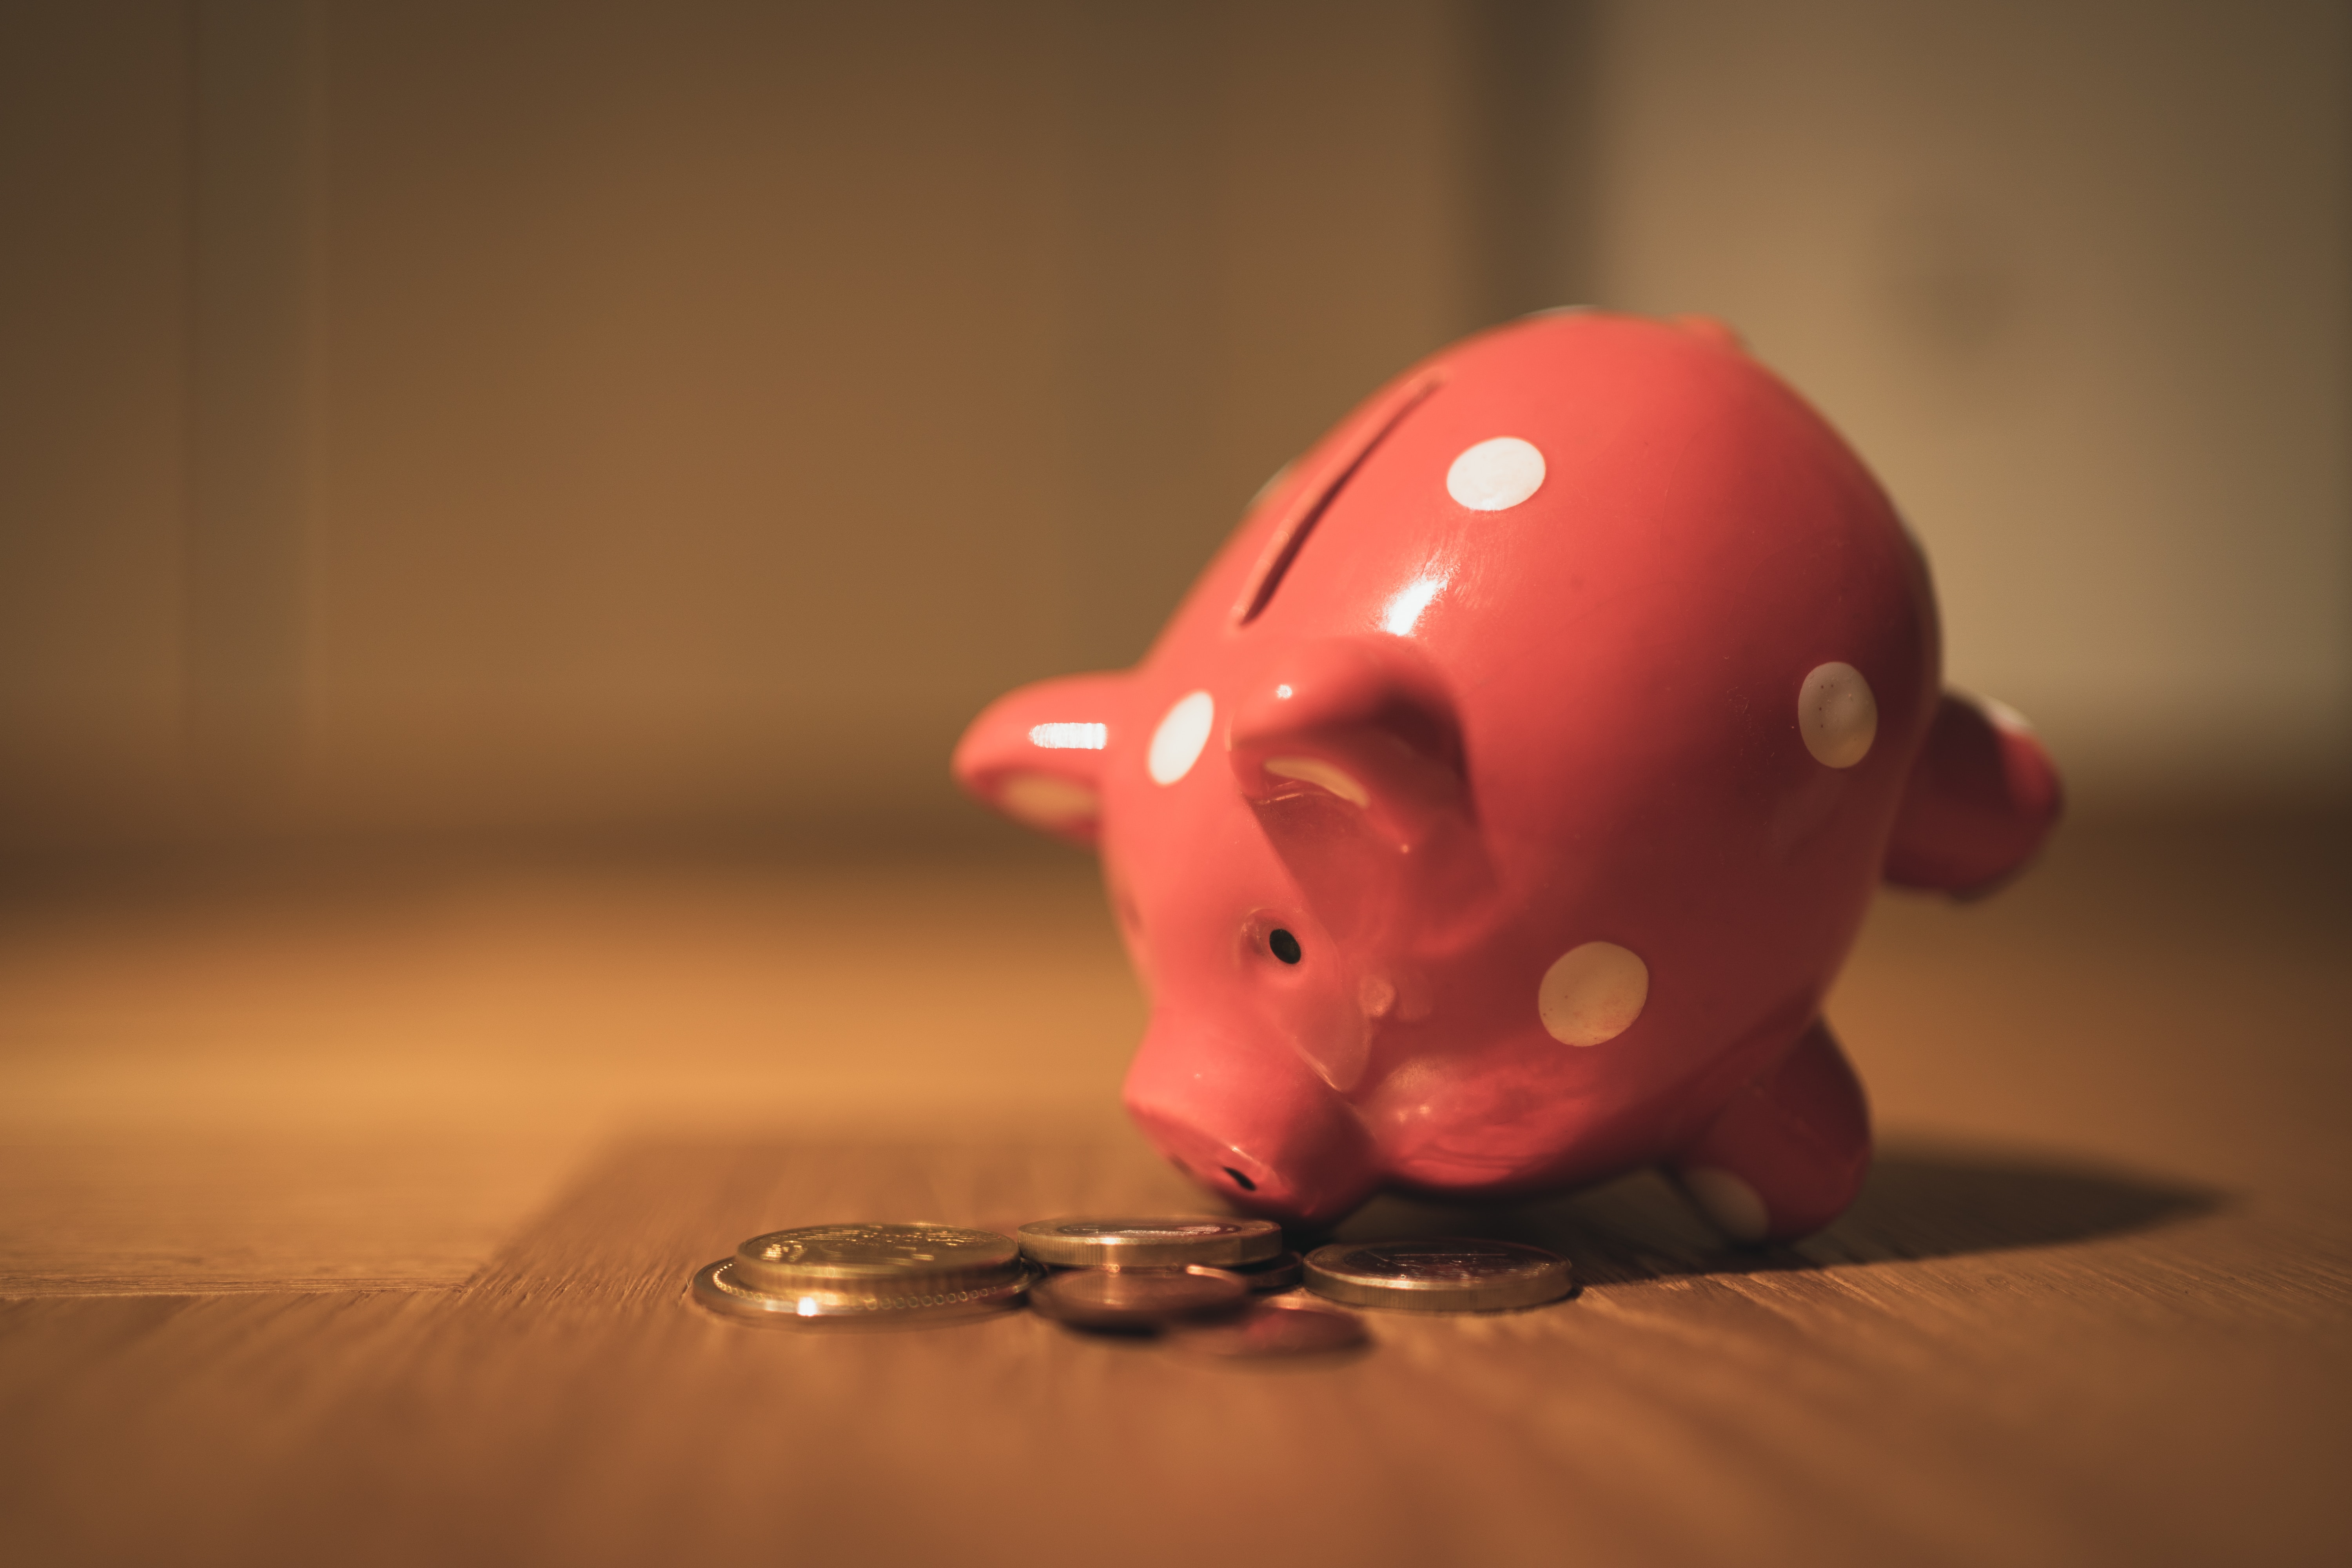 A pink piggy bank with white dots on it sat on a wooden table, the piggy bank is perched on its front legs with the snout touching a pile of coins. 